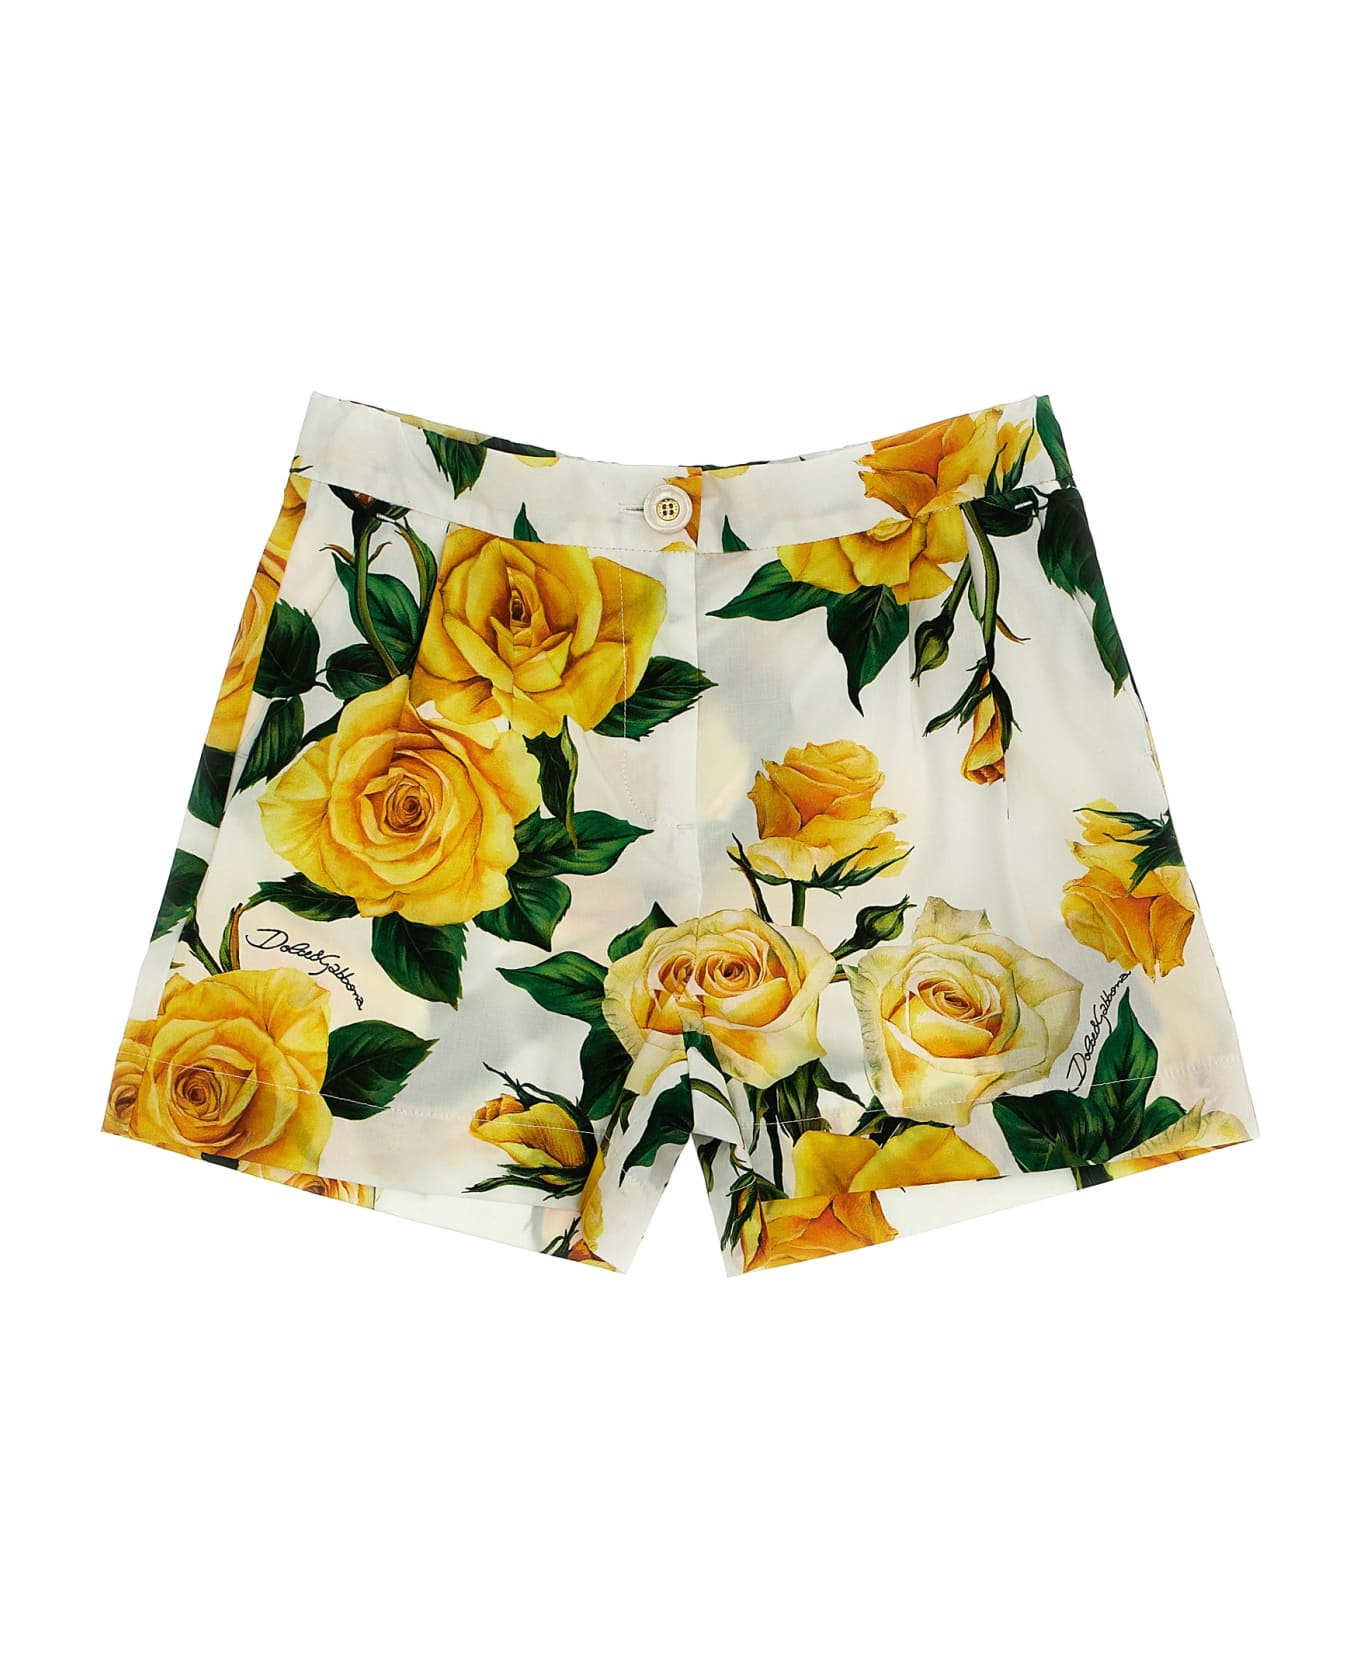 Dolce & Gabbana 'rose Gialle' Shorts - Multicolor